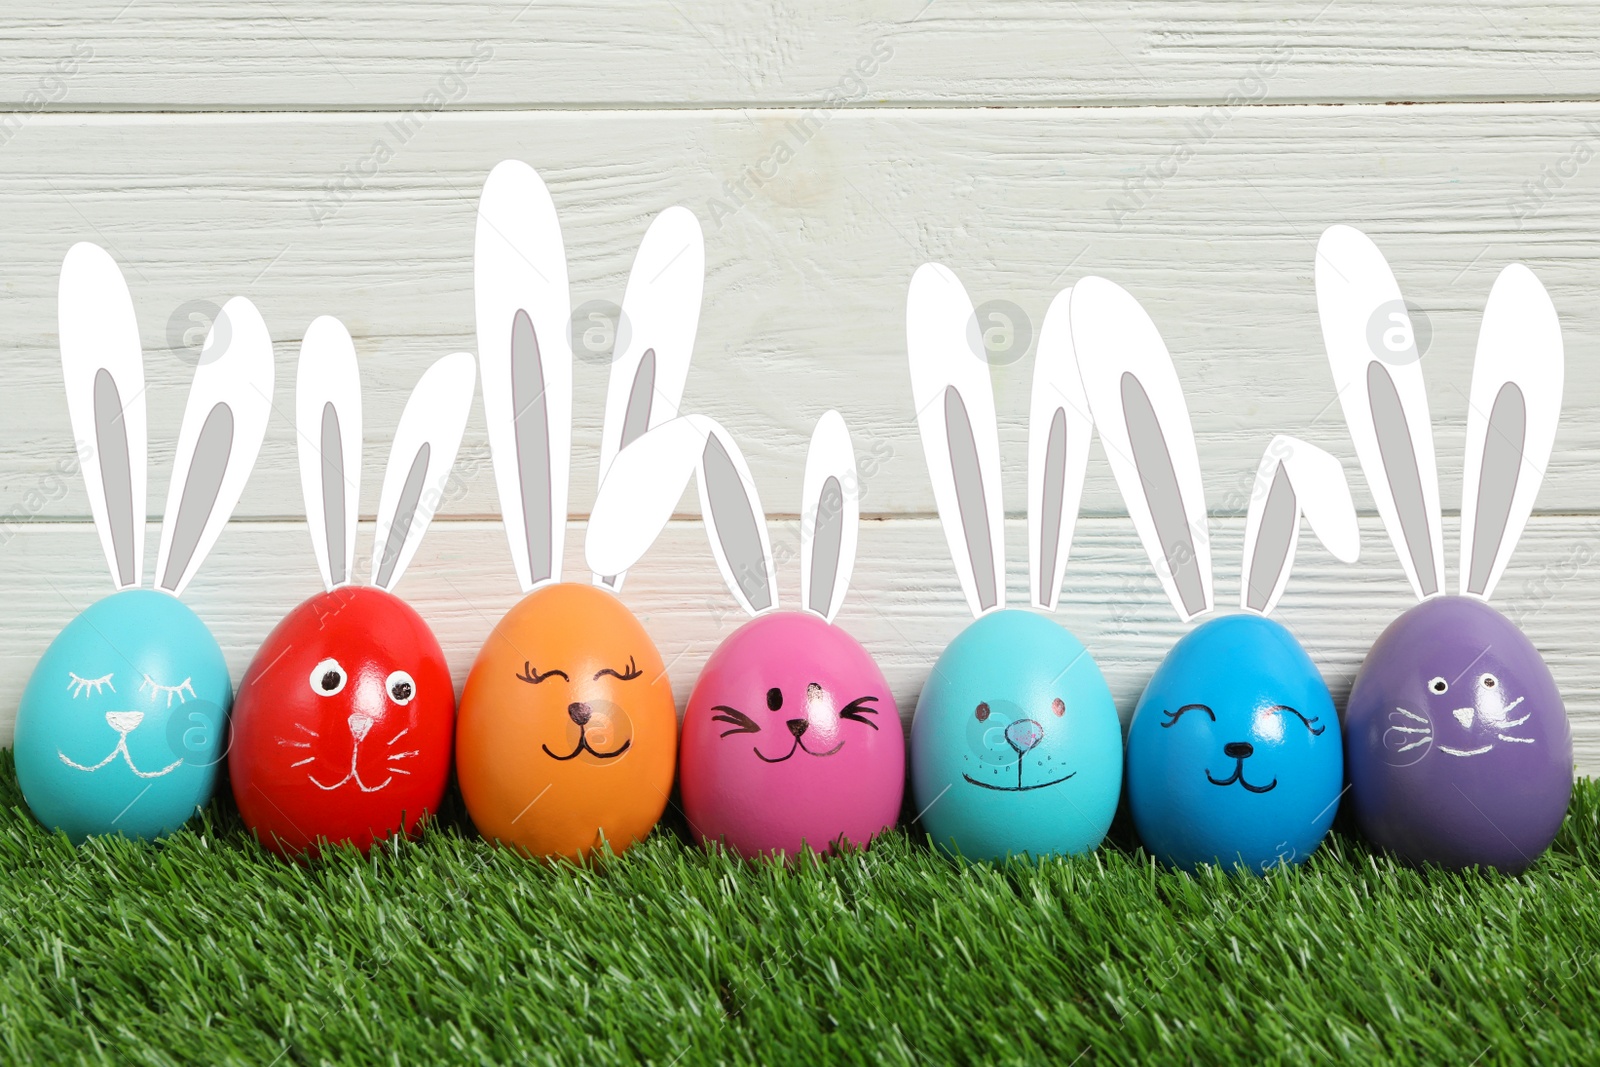 Image of Colorful eggs as Easter bunnies on green grass against white wooden background